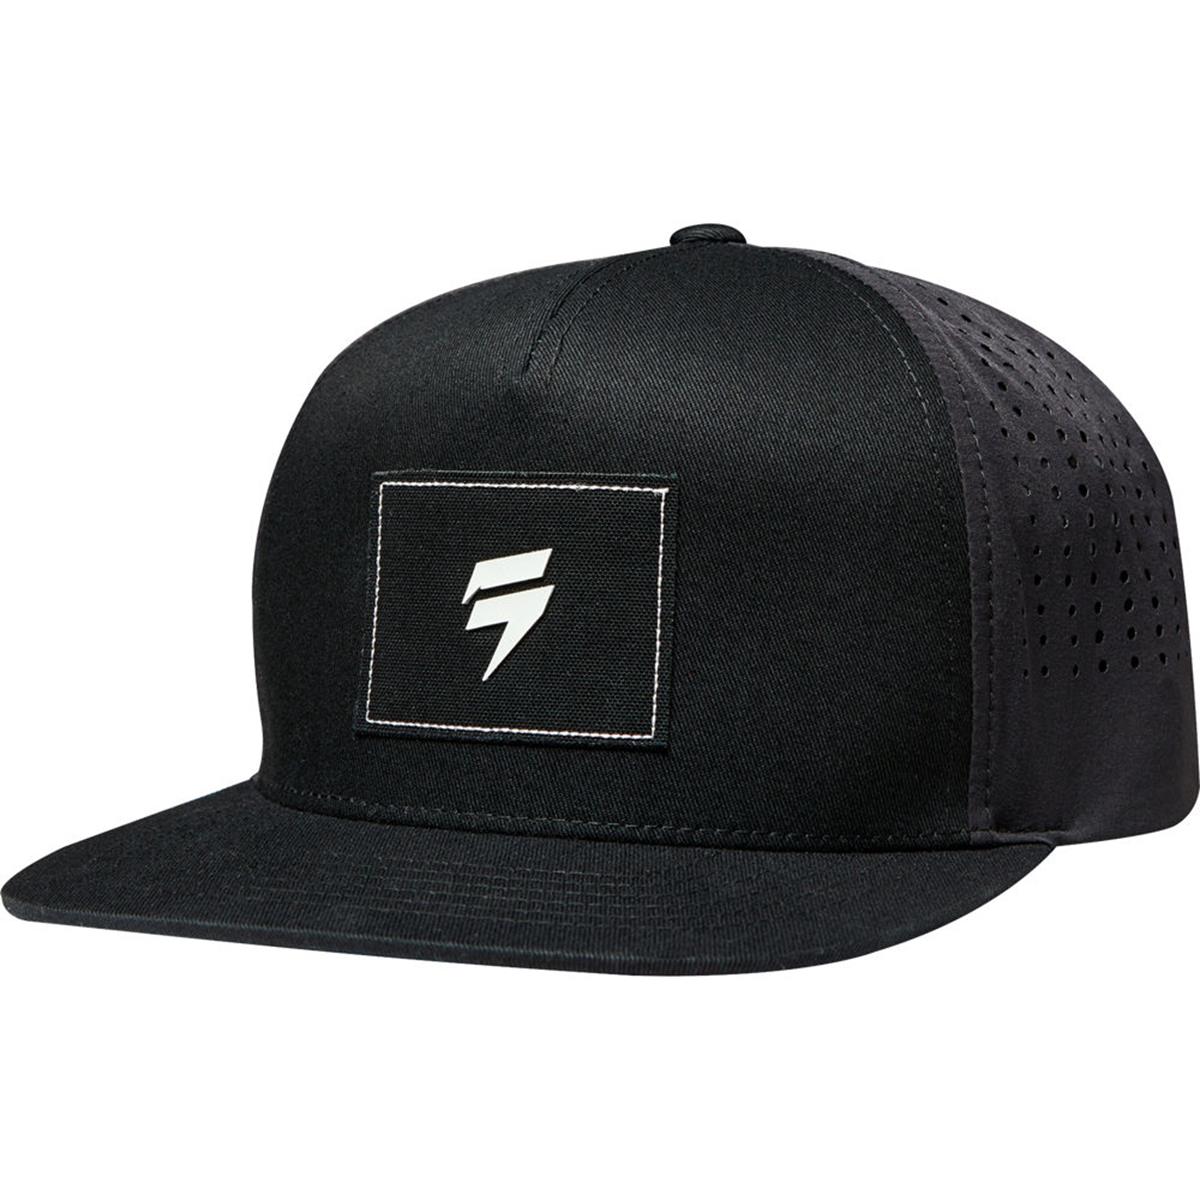 Shift Casquette Snap Back 3LUE Label Iceland Black/Grey - Limited Edition